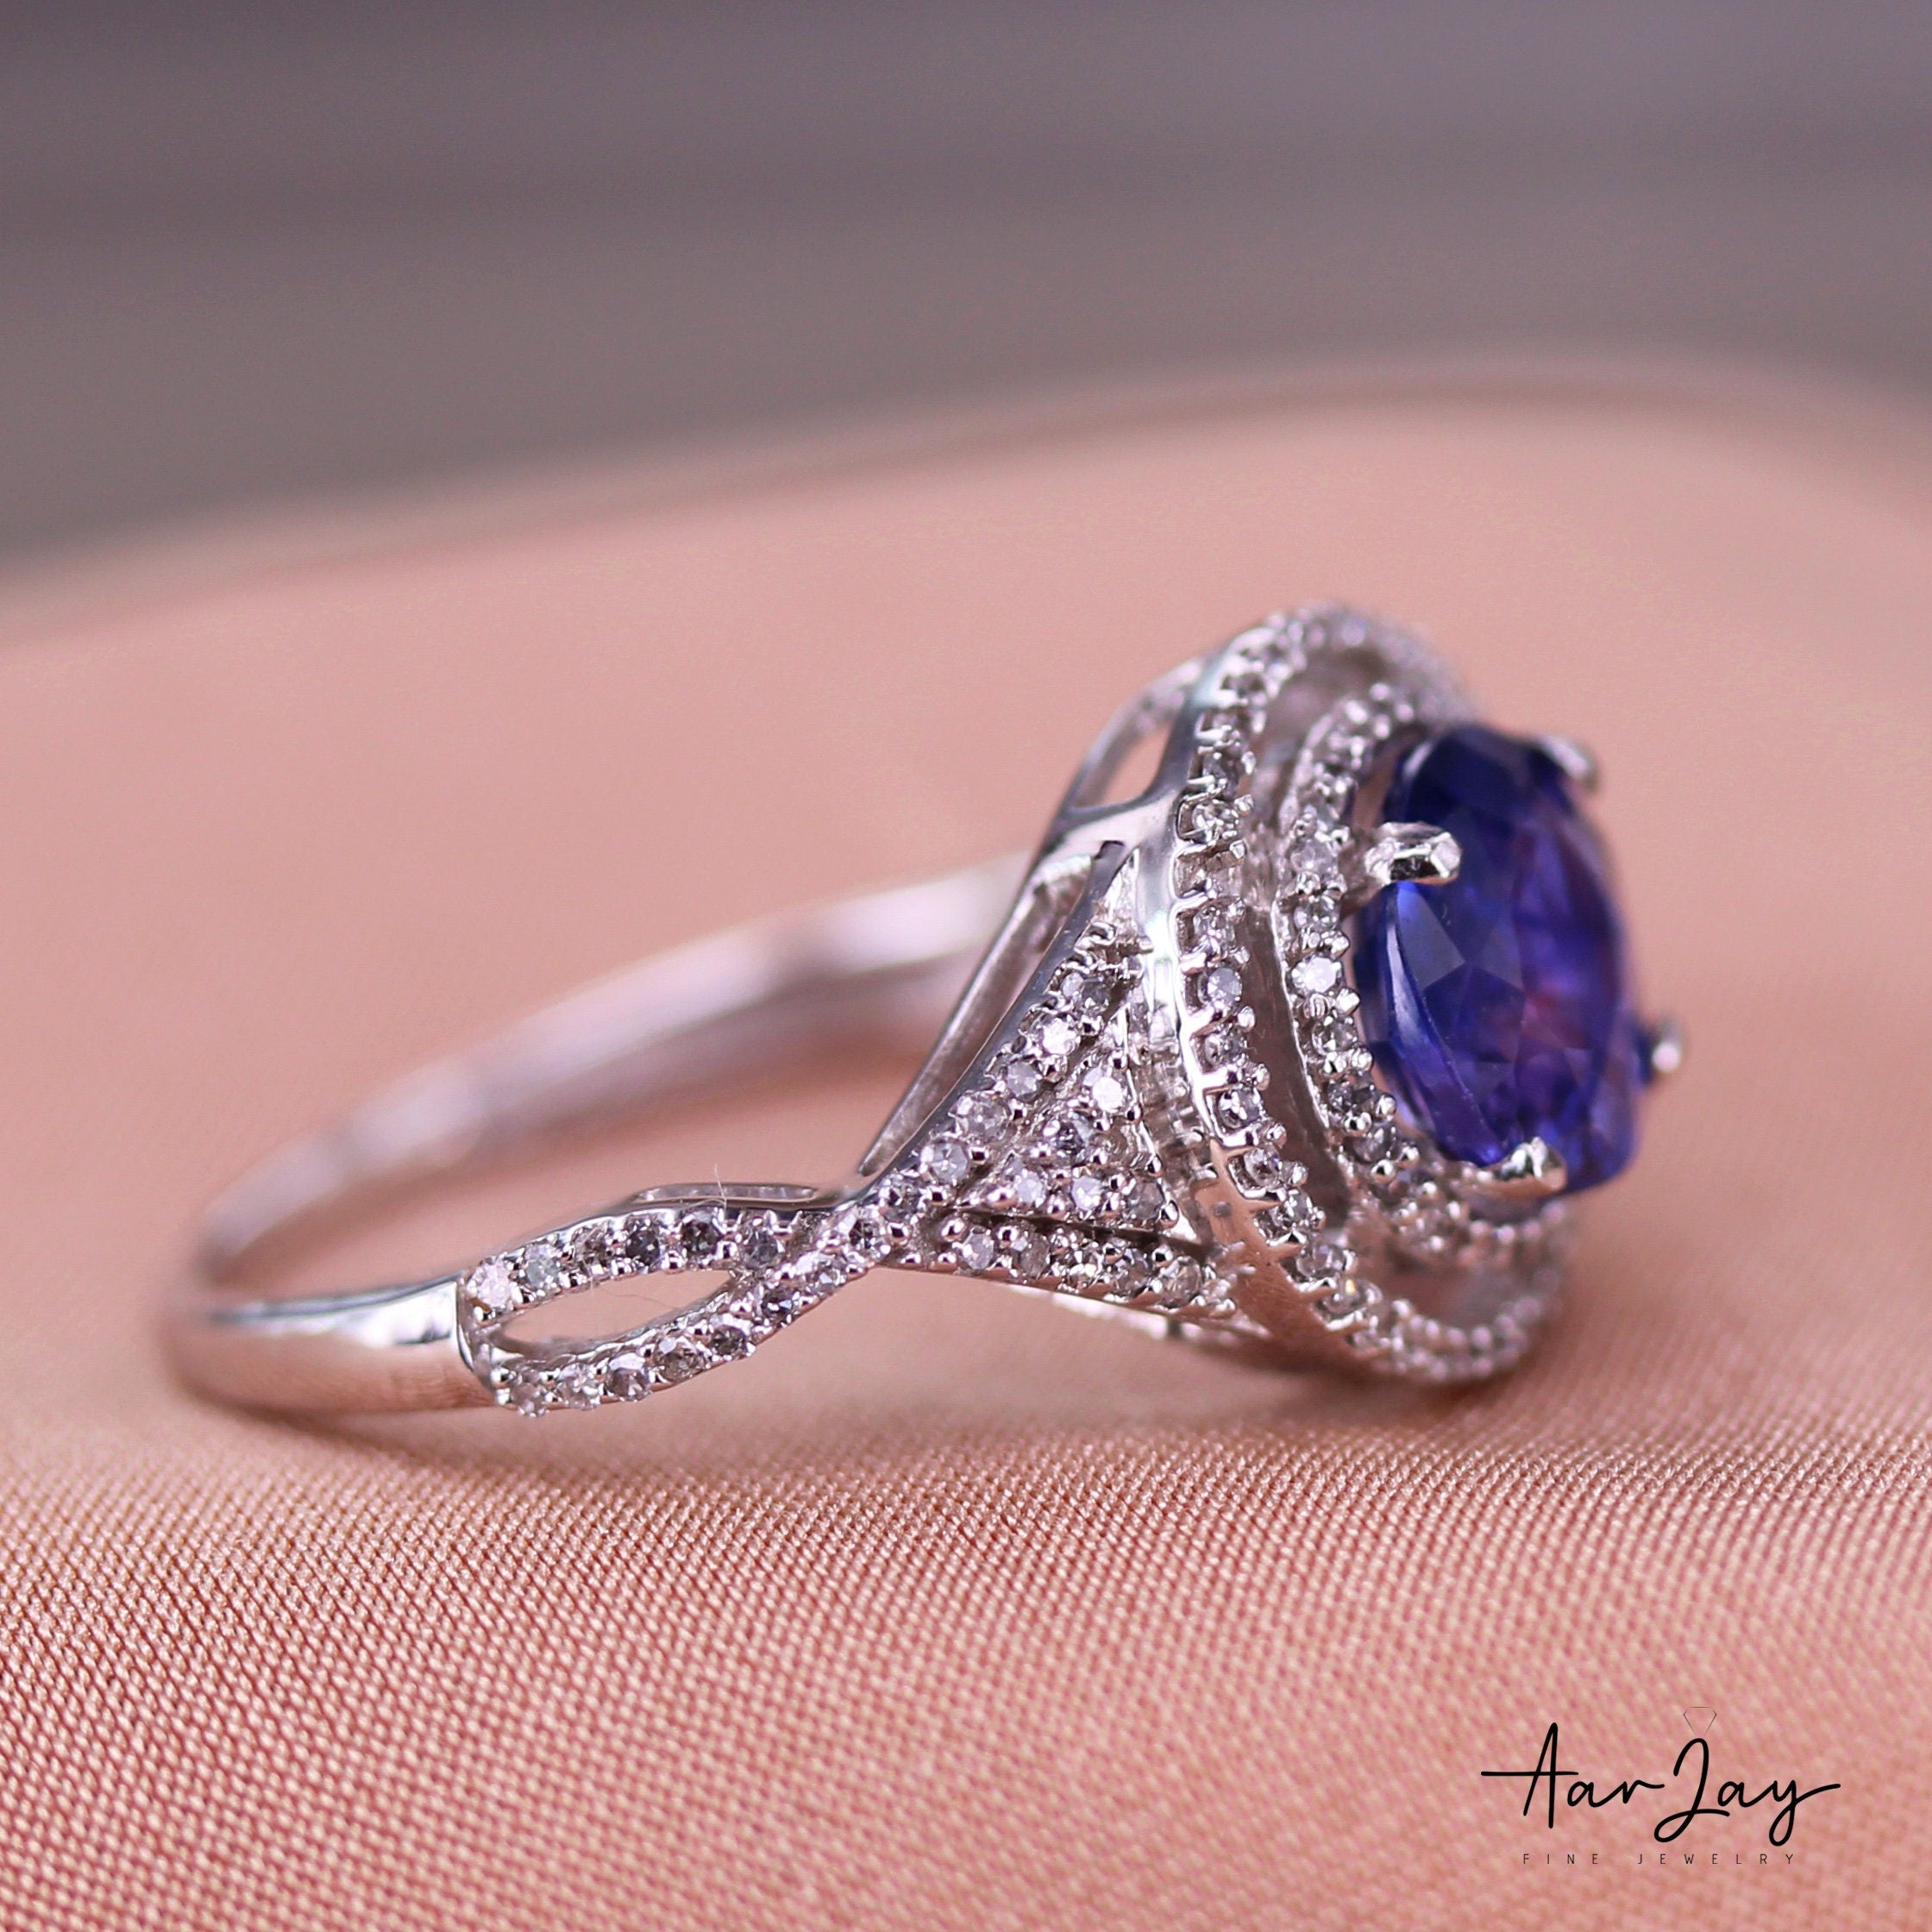 14Kt White Gold Ring, Unheated Lavender Sapphire 2.02 Cts Ring, Lovely Natural Purple Sapphire Ring,Violet Sapphire Ring, Sapphire Ring Gift - Baza Boutique 